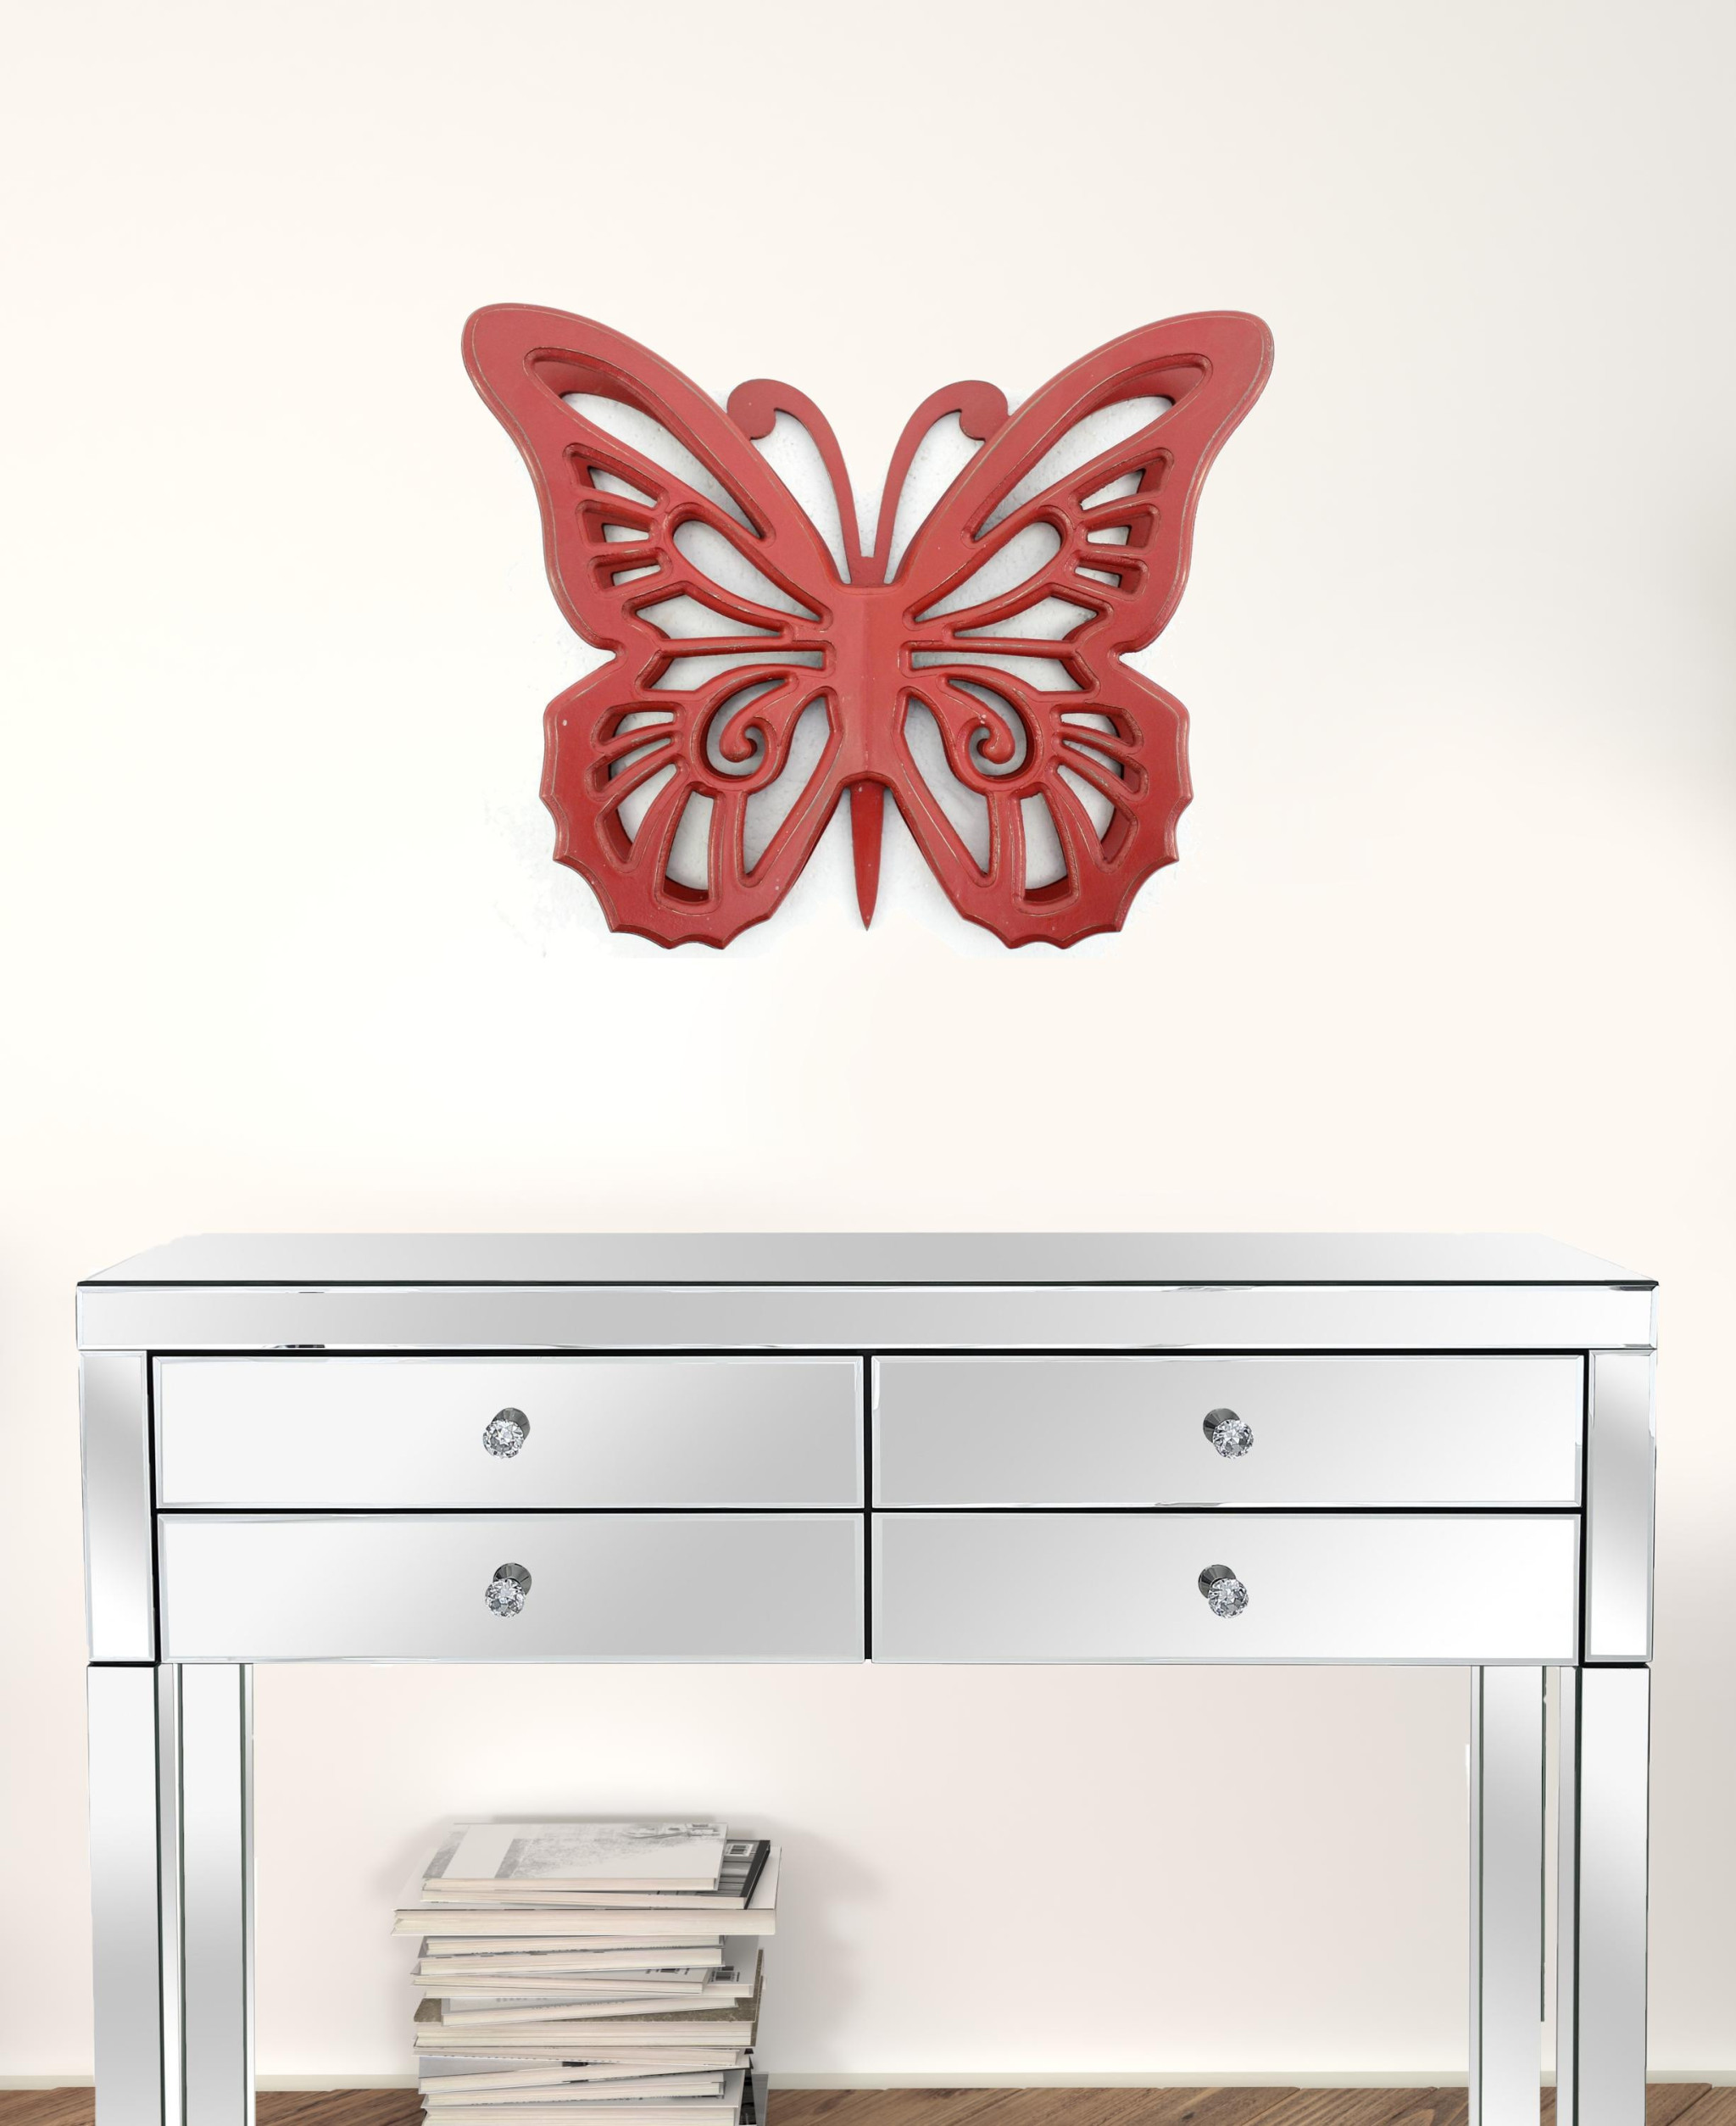 23" X 19" X 4" Red Rustic Butterfly Wooden  Wall Decor-274491-1